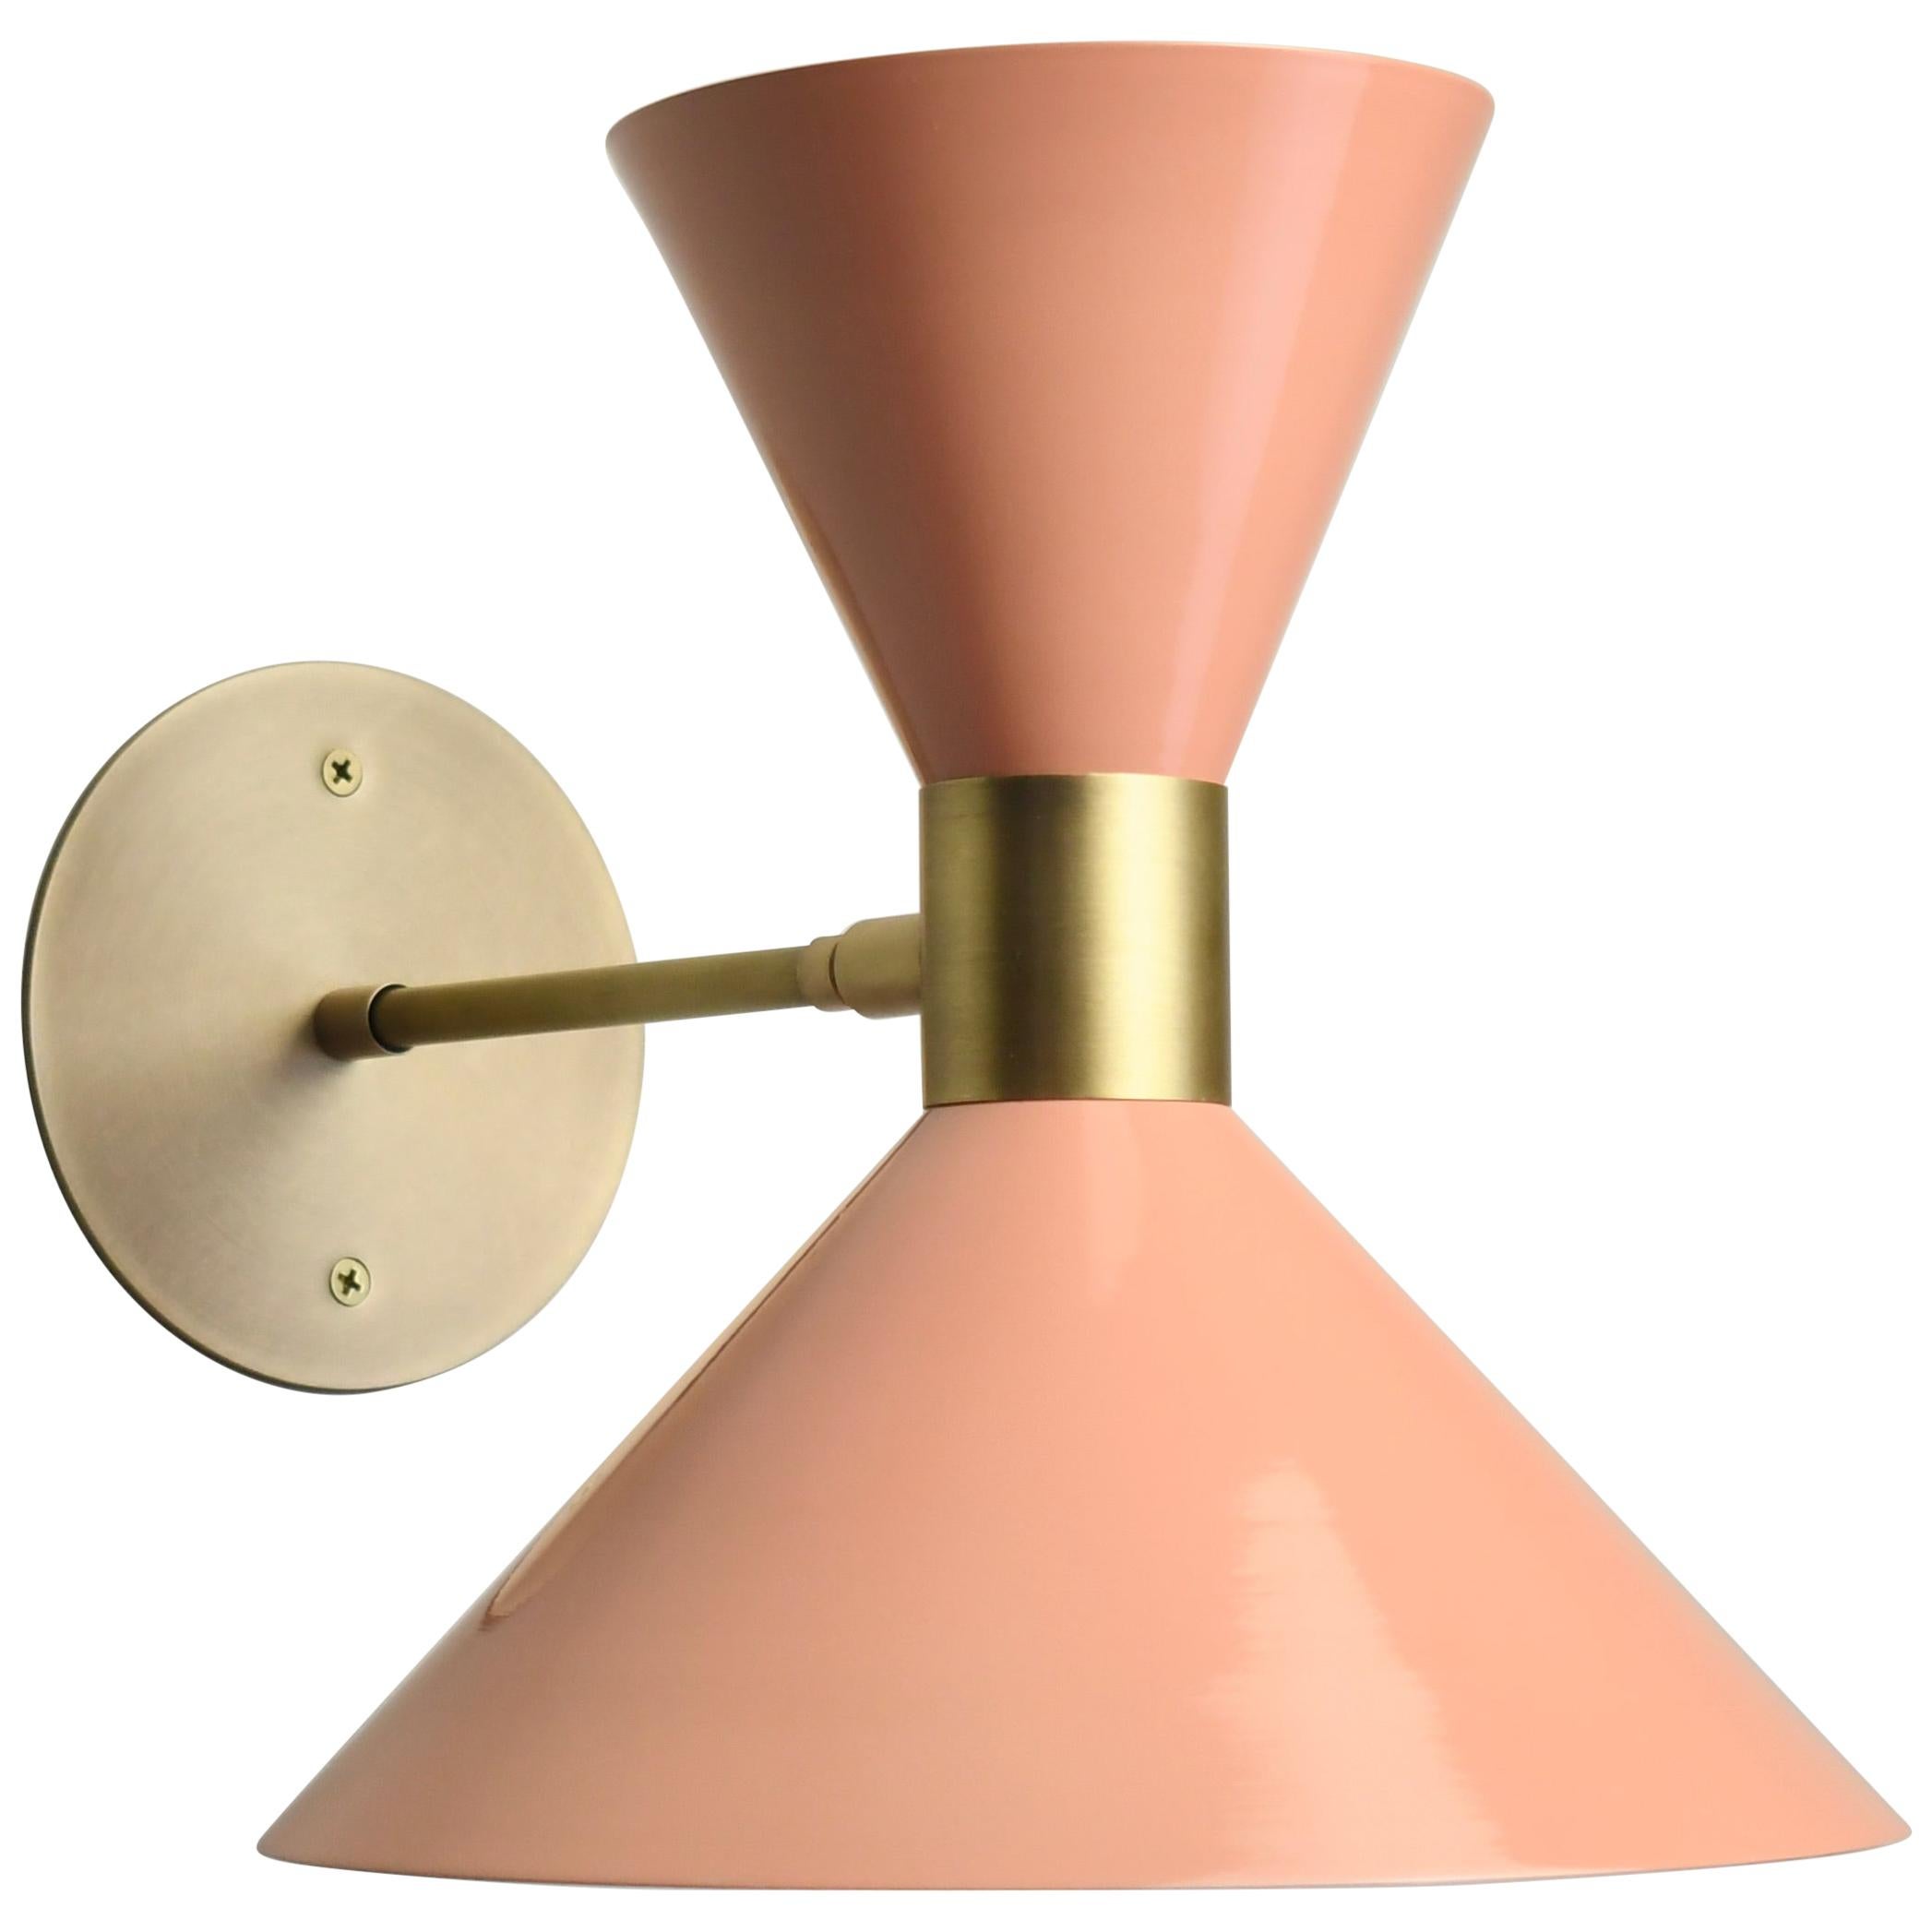 Large Scale Monarch Wall Sconce in Brass & Blush Enamel by Blueprint Lighting